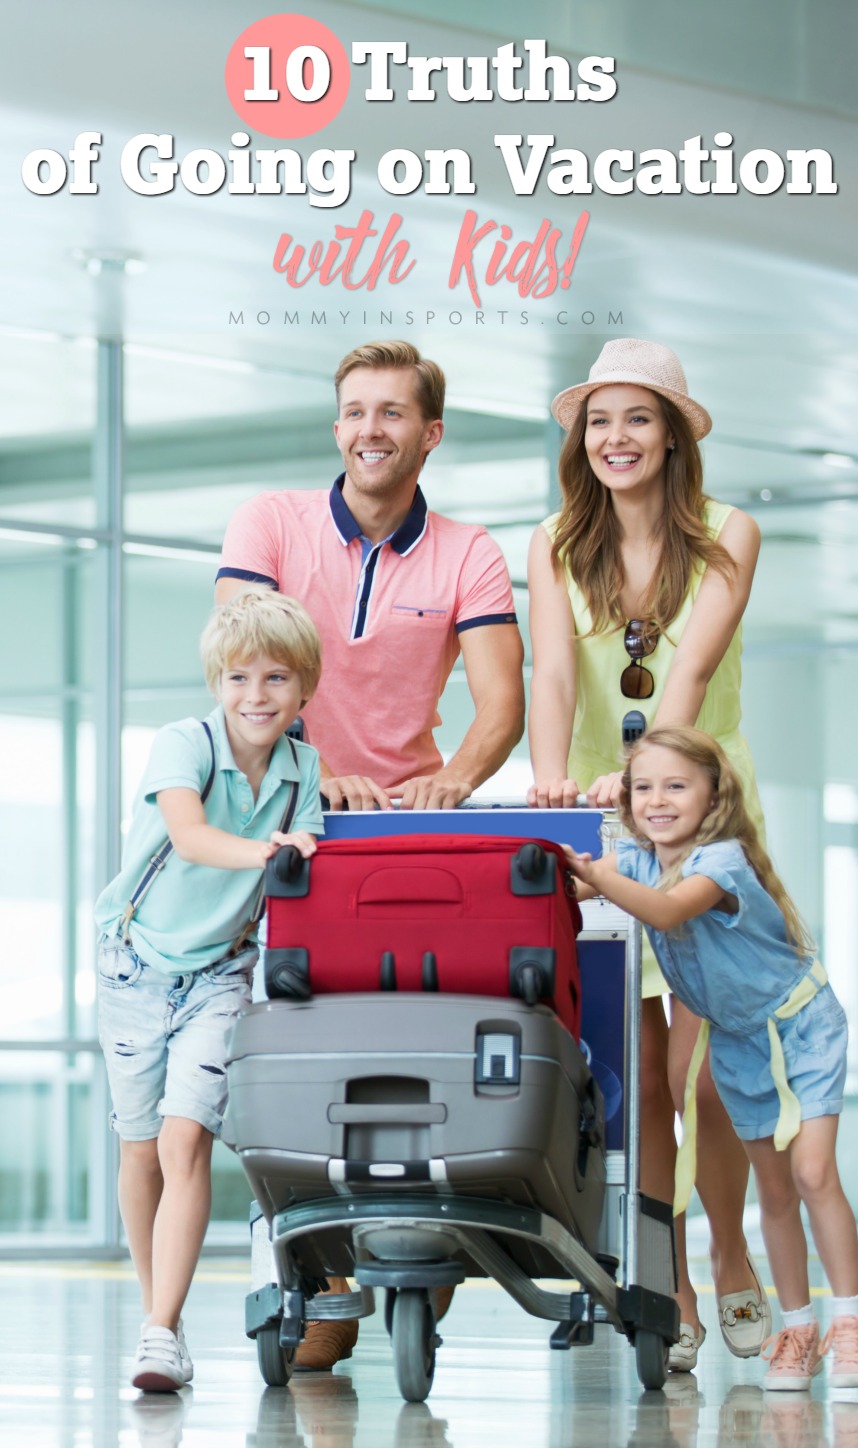 Planning that next summer adventure or holiday getaway? Before you go, a gentle reminder of the 10 Truths of Going on Vacation with Kids!